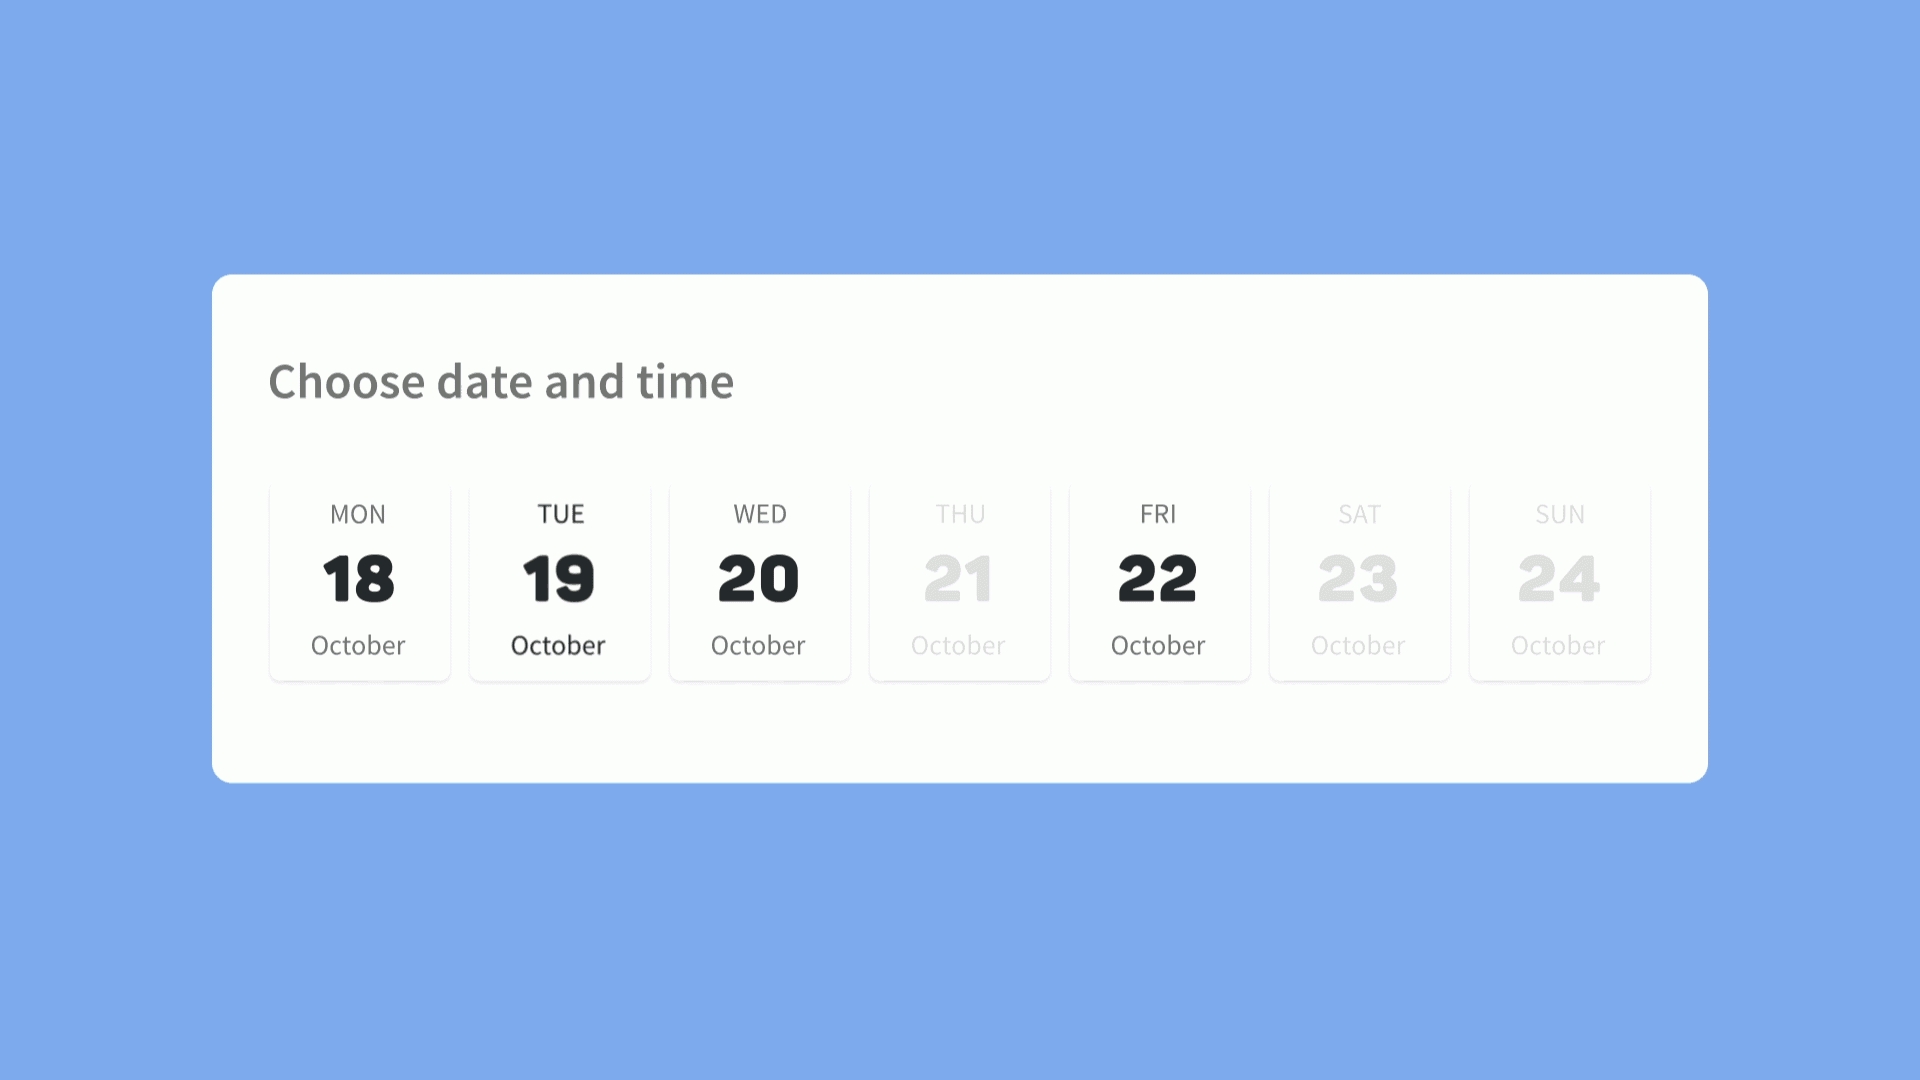 Pipedrive&#039;s Scheduling Tool Takes The Hassle Out Of Booking Meetings intended for Birthday Time Slot Scheduling Calendar